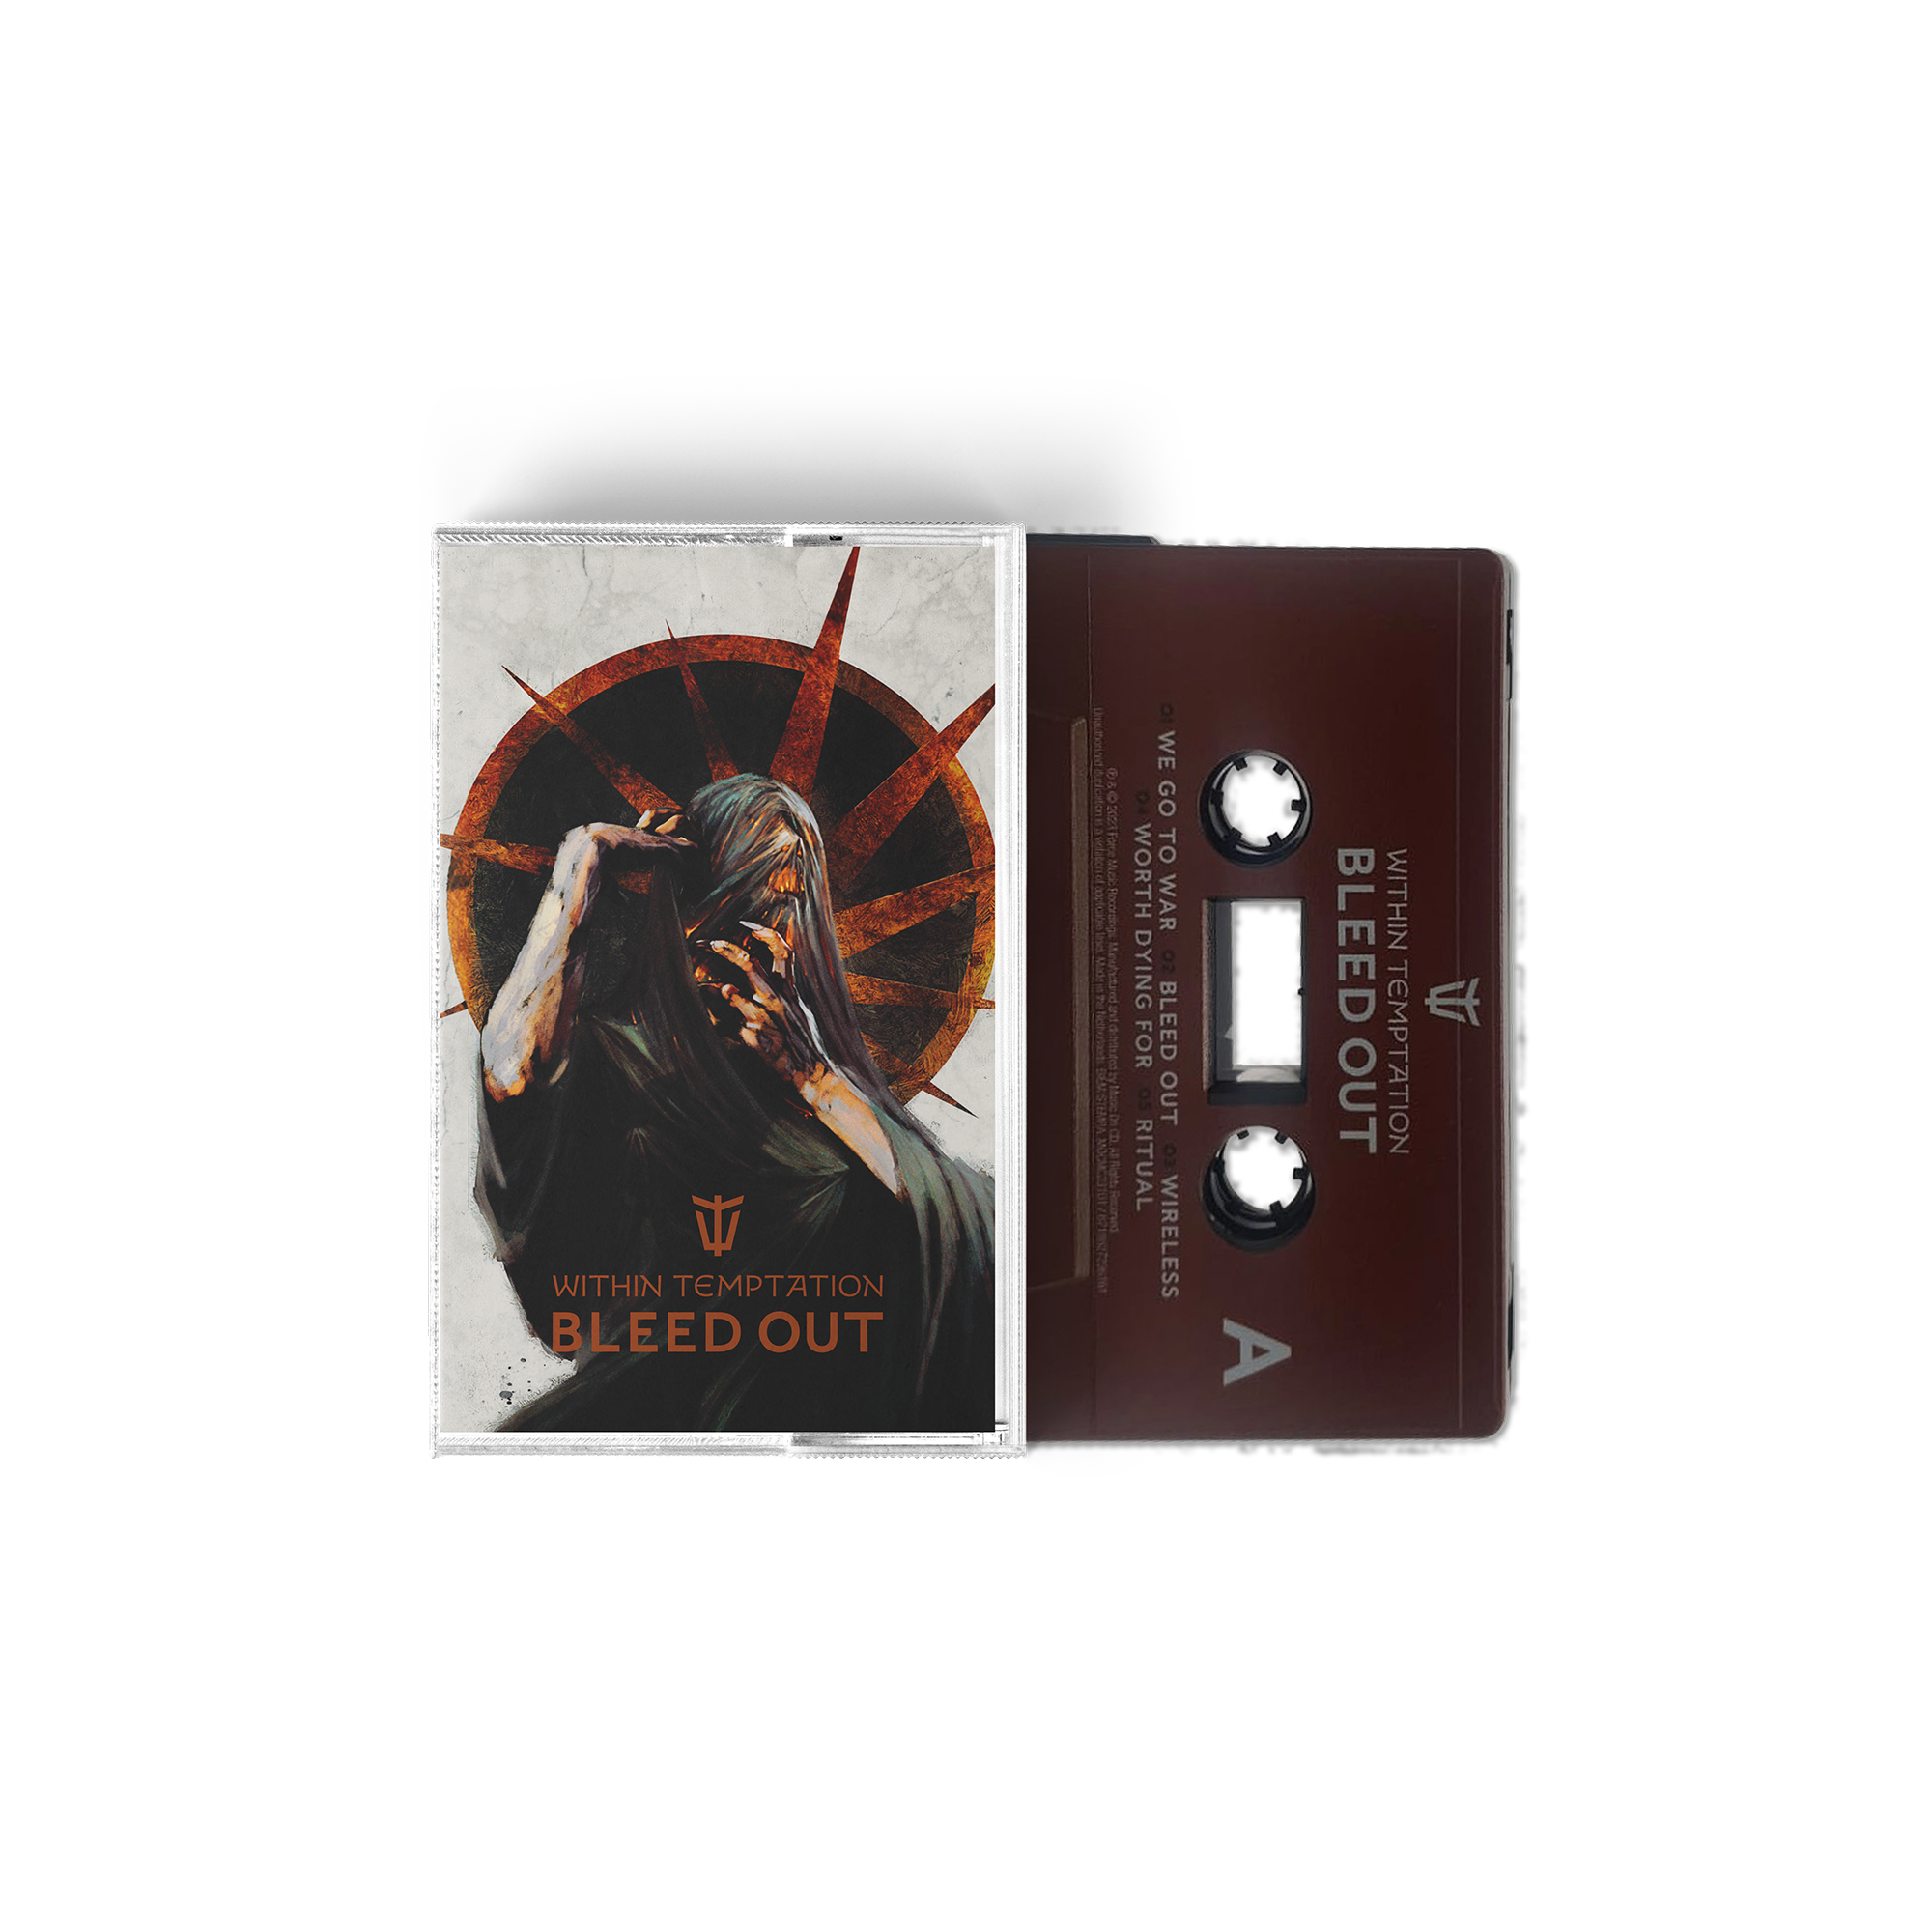 Within Temptation - Bleed Out: Limited Edition Brown Shell Cassette